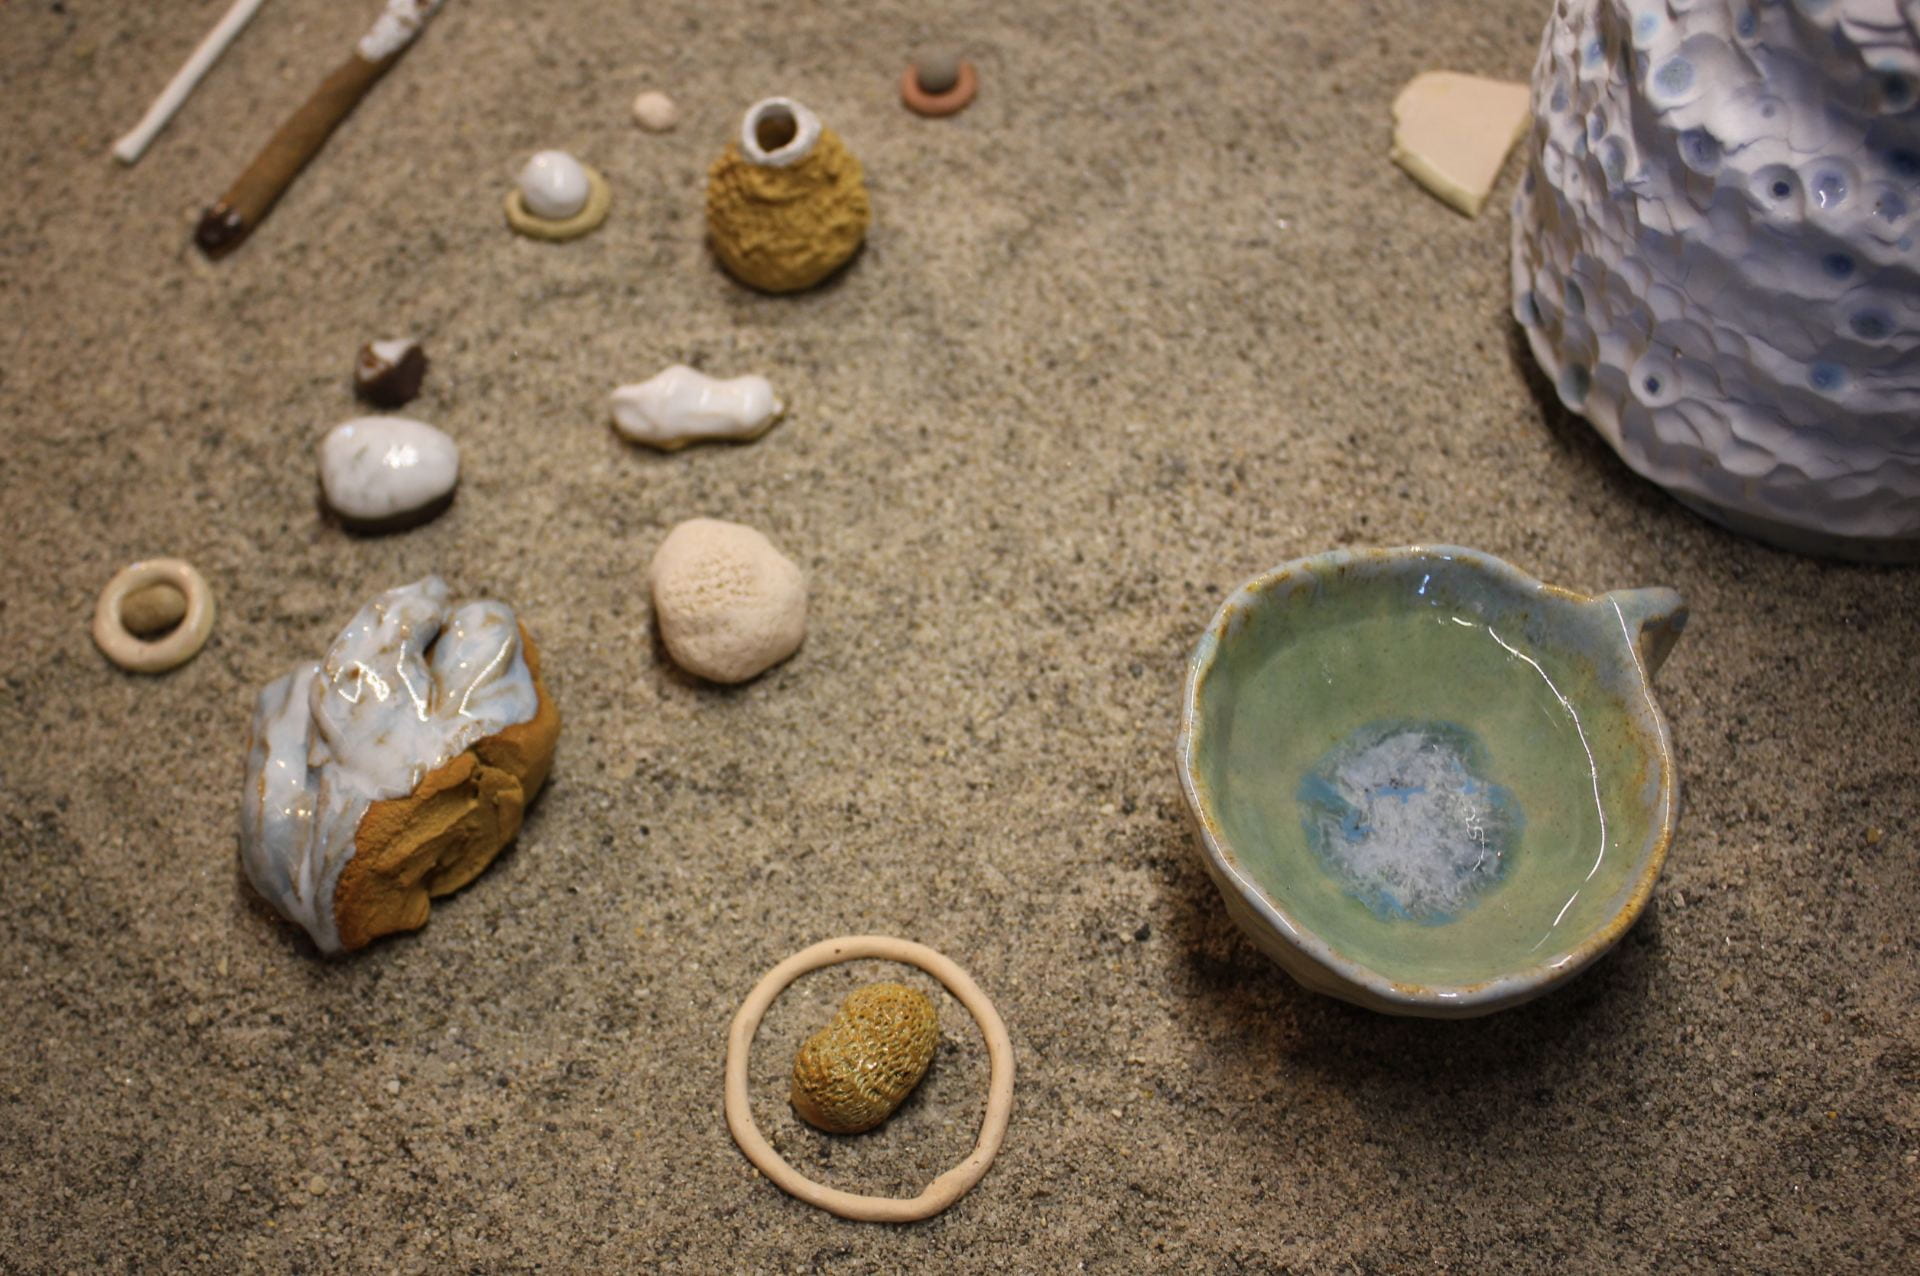 Assortment of abstract ceramic forms in sand